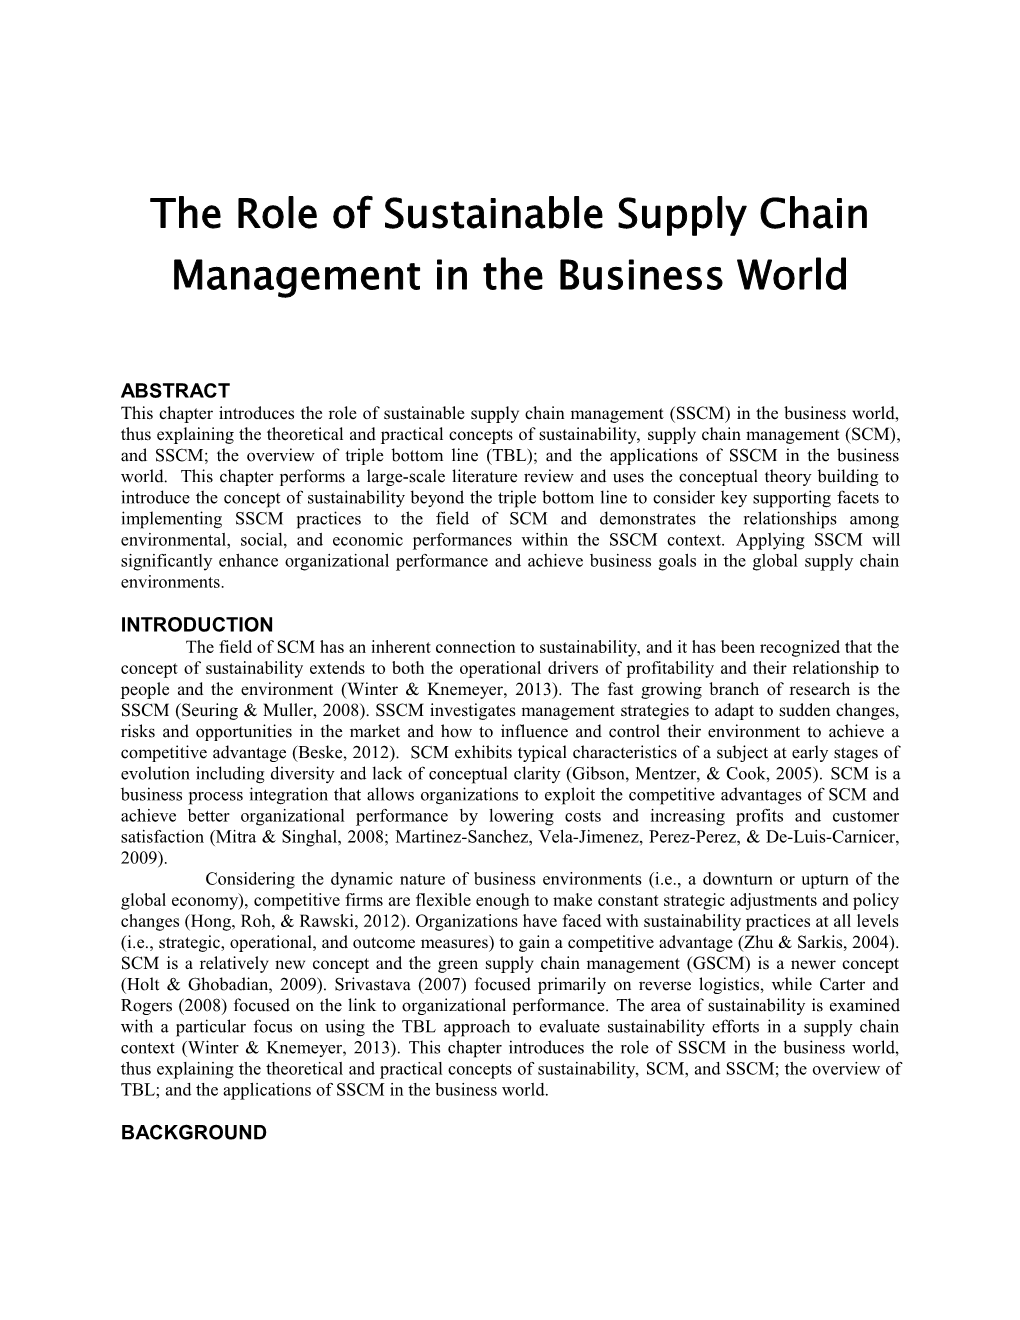 The Role of Sustainable Supply Chain Management in the Business World